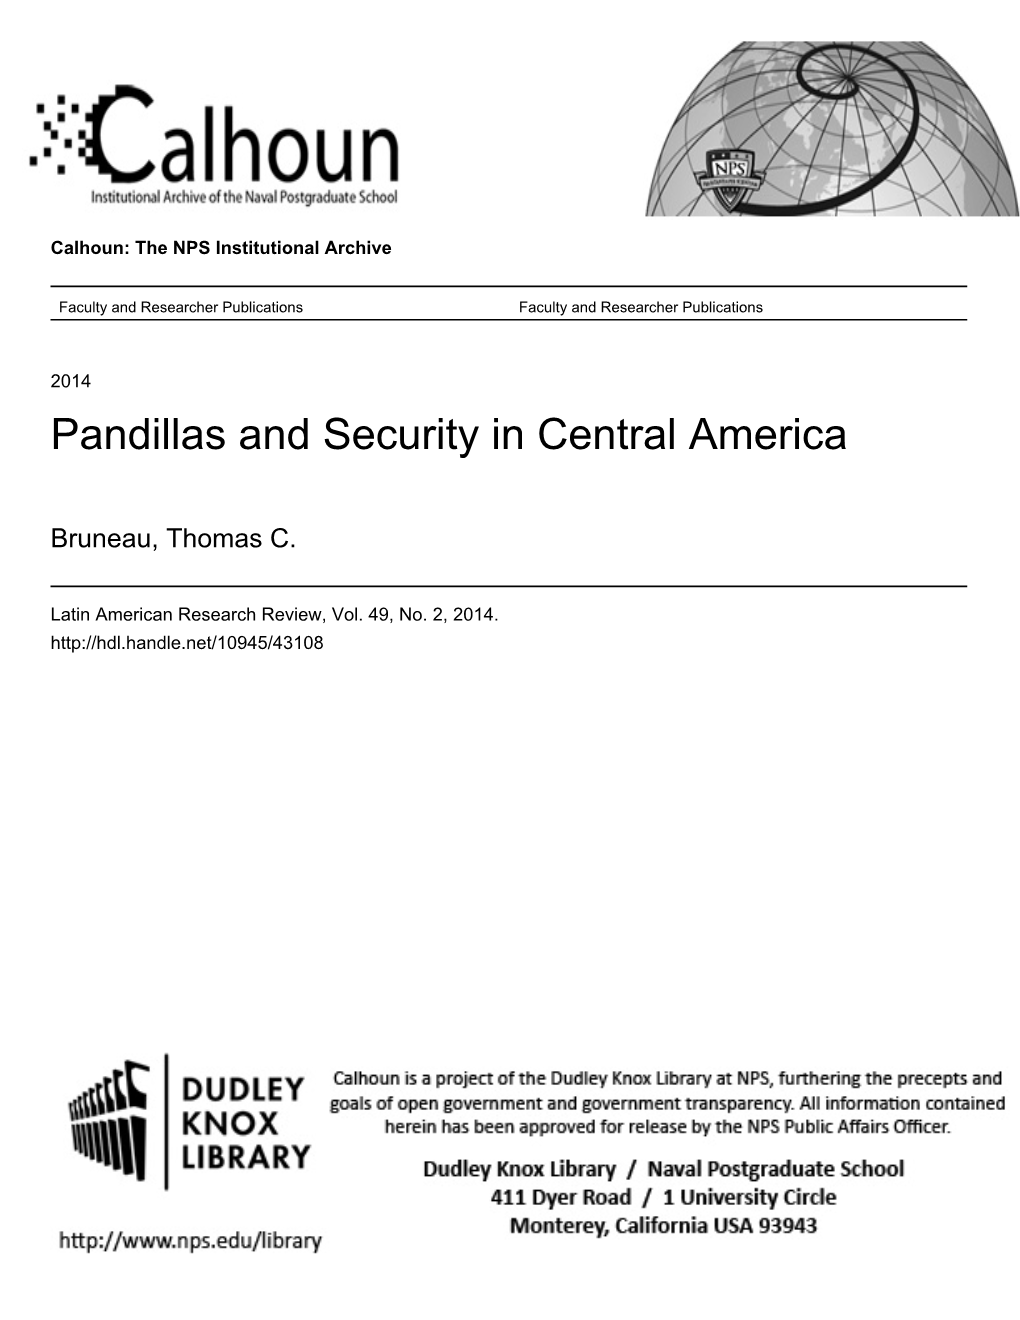 Pandillas and Security in Central America